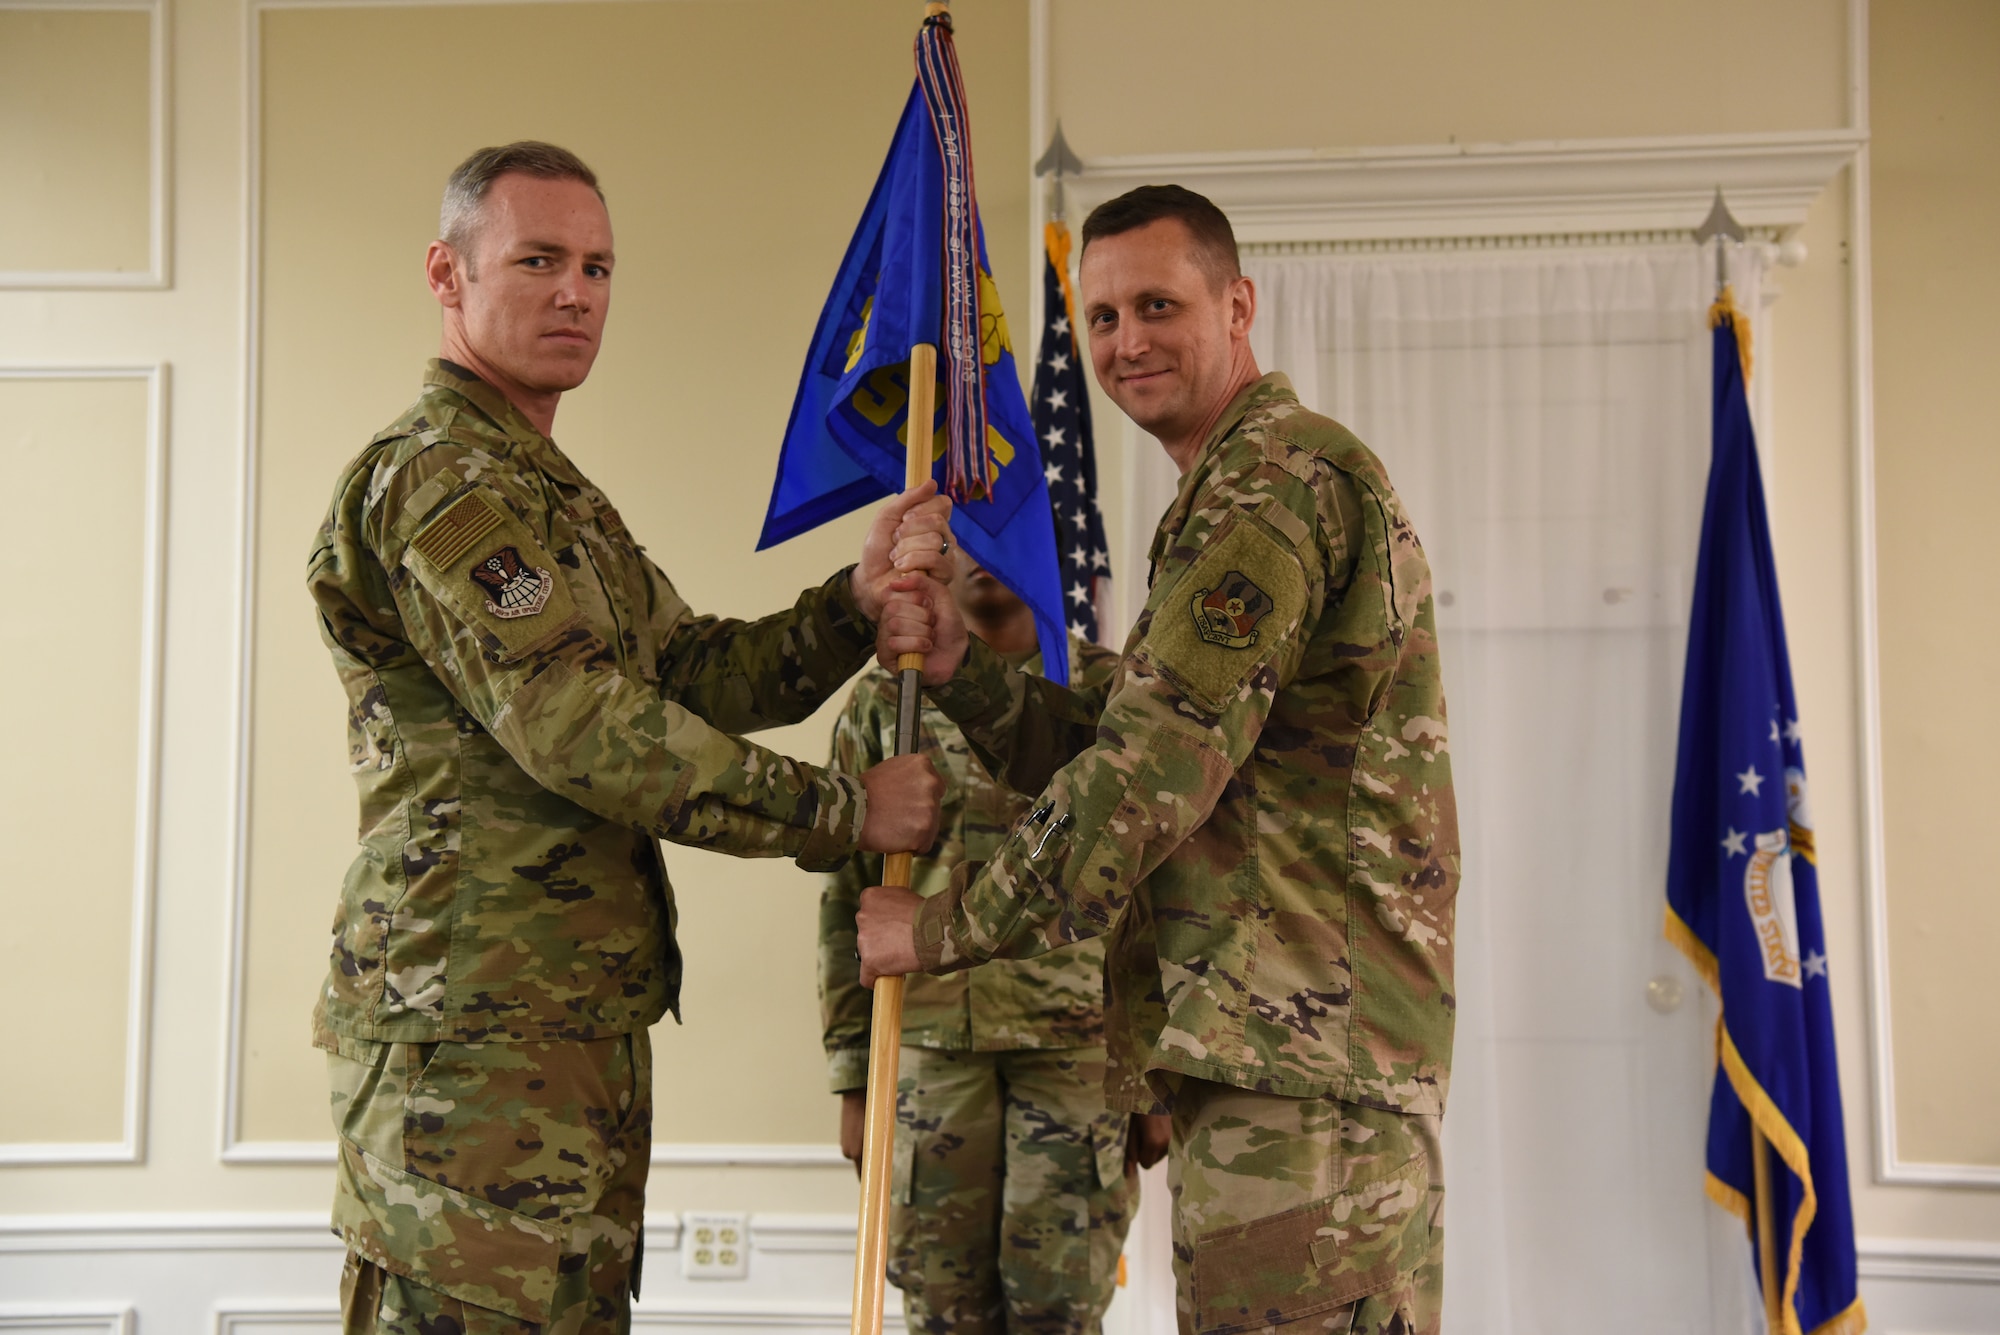 Col. Coleman passing the guidon to Lt. Col. Reid.